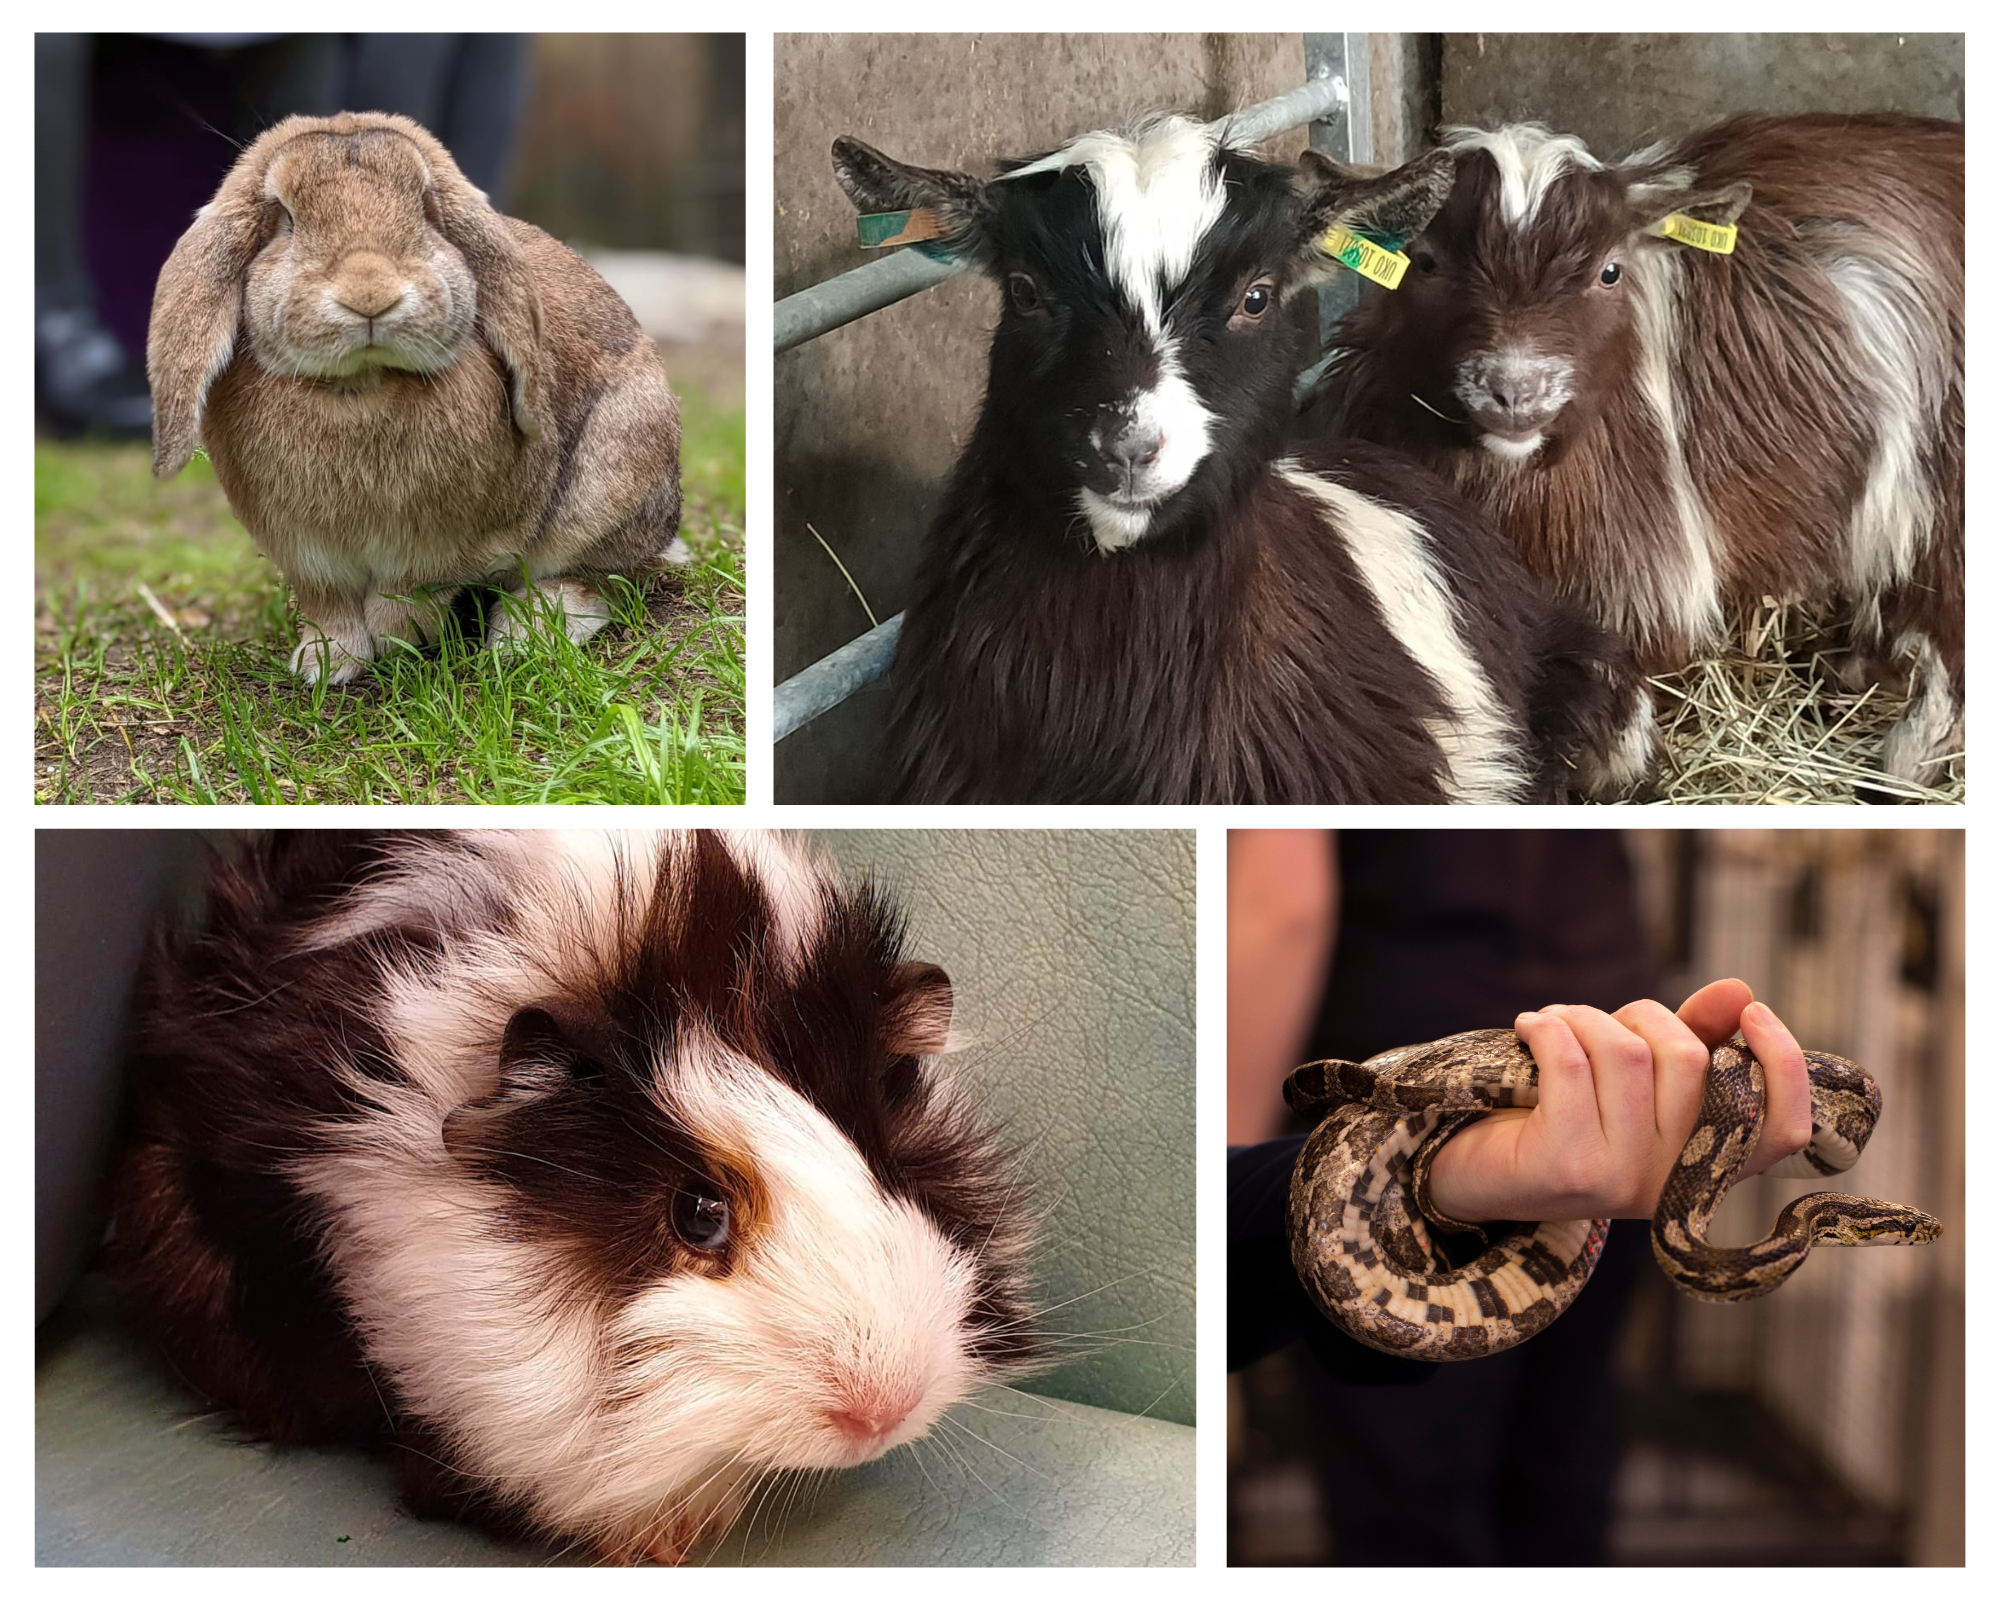 A photo selection of some of our animals you could sponsor - a large lop-eared rabbit, a snake, some pygmy goats and a guinea pig